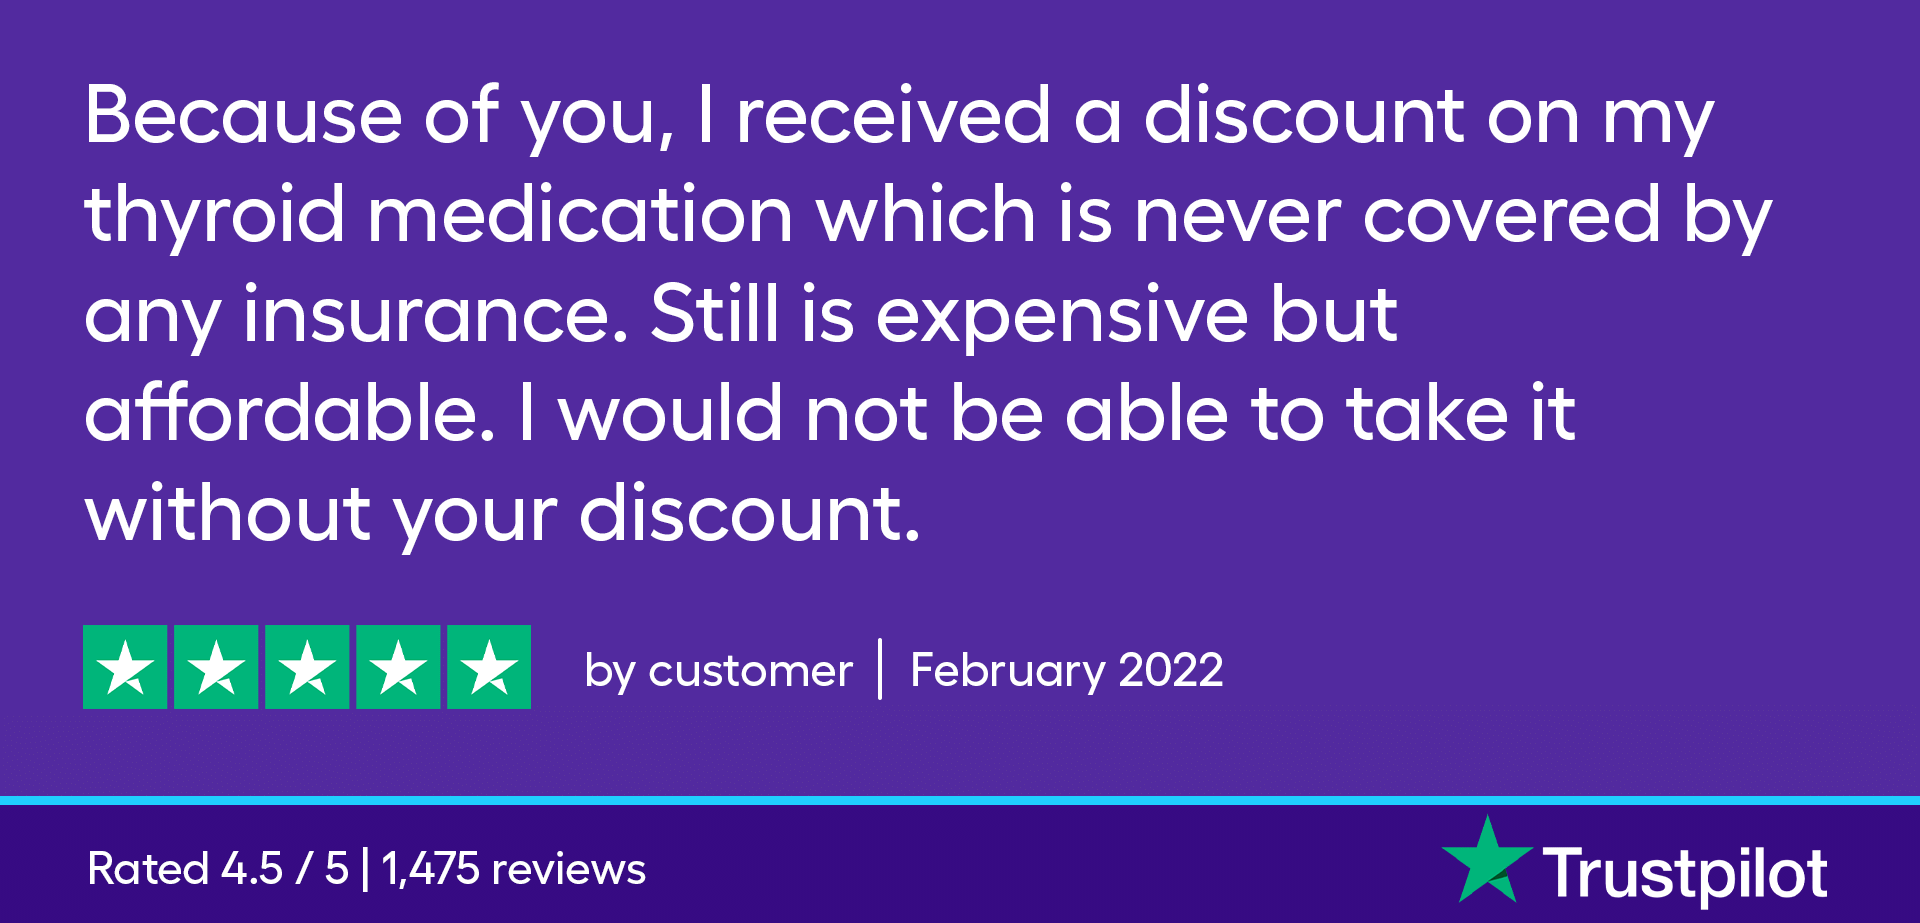 Because of you, I received a discount on my thyroid medication which is never covered by any insurance. Still is expensive but affordable. I would not be able to take it with out your discount.